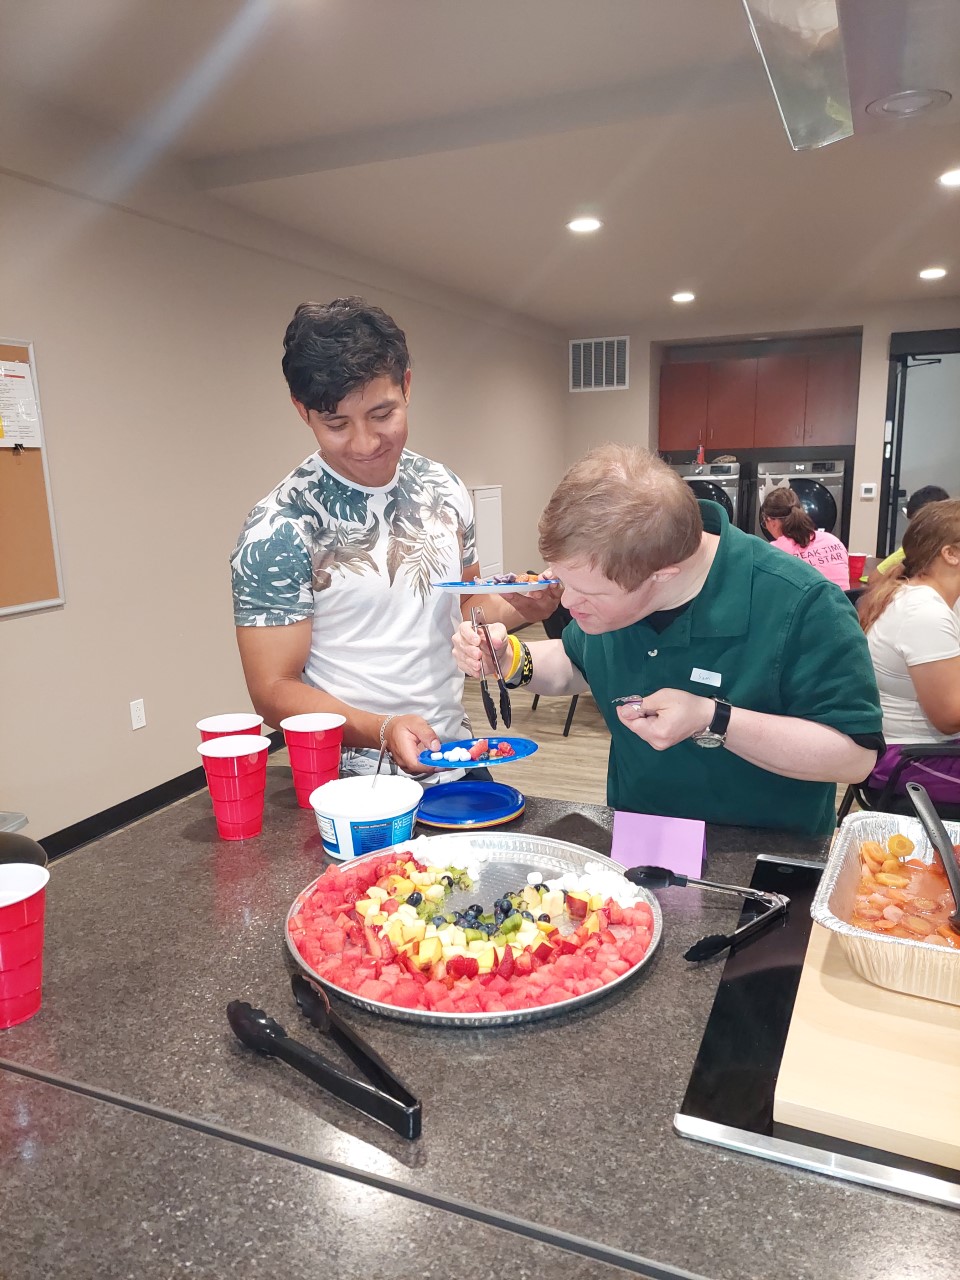 young adults getting food from a table including fruit at a gathering indoors